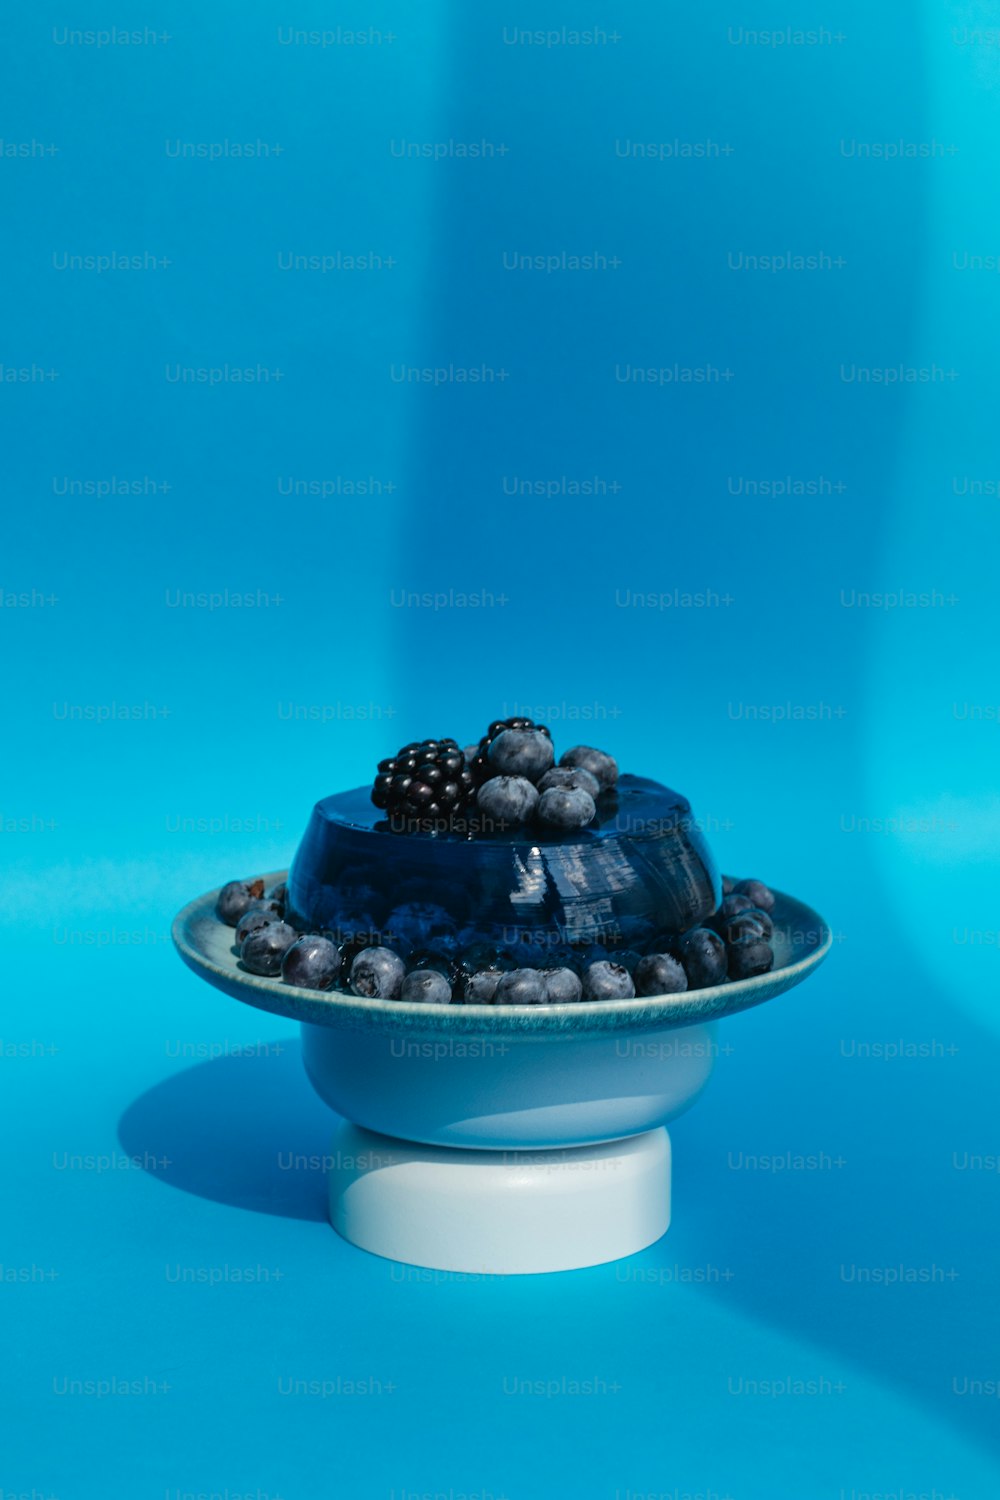 a blue cake sitting on top of a blue plate